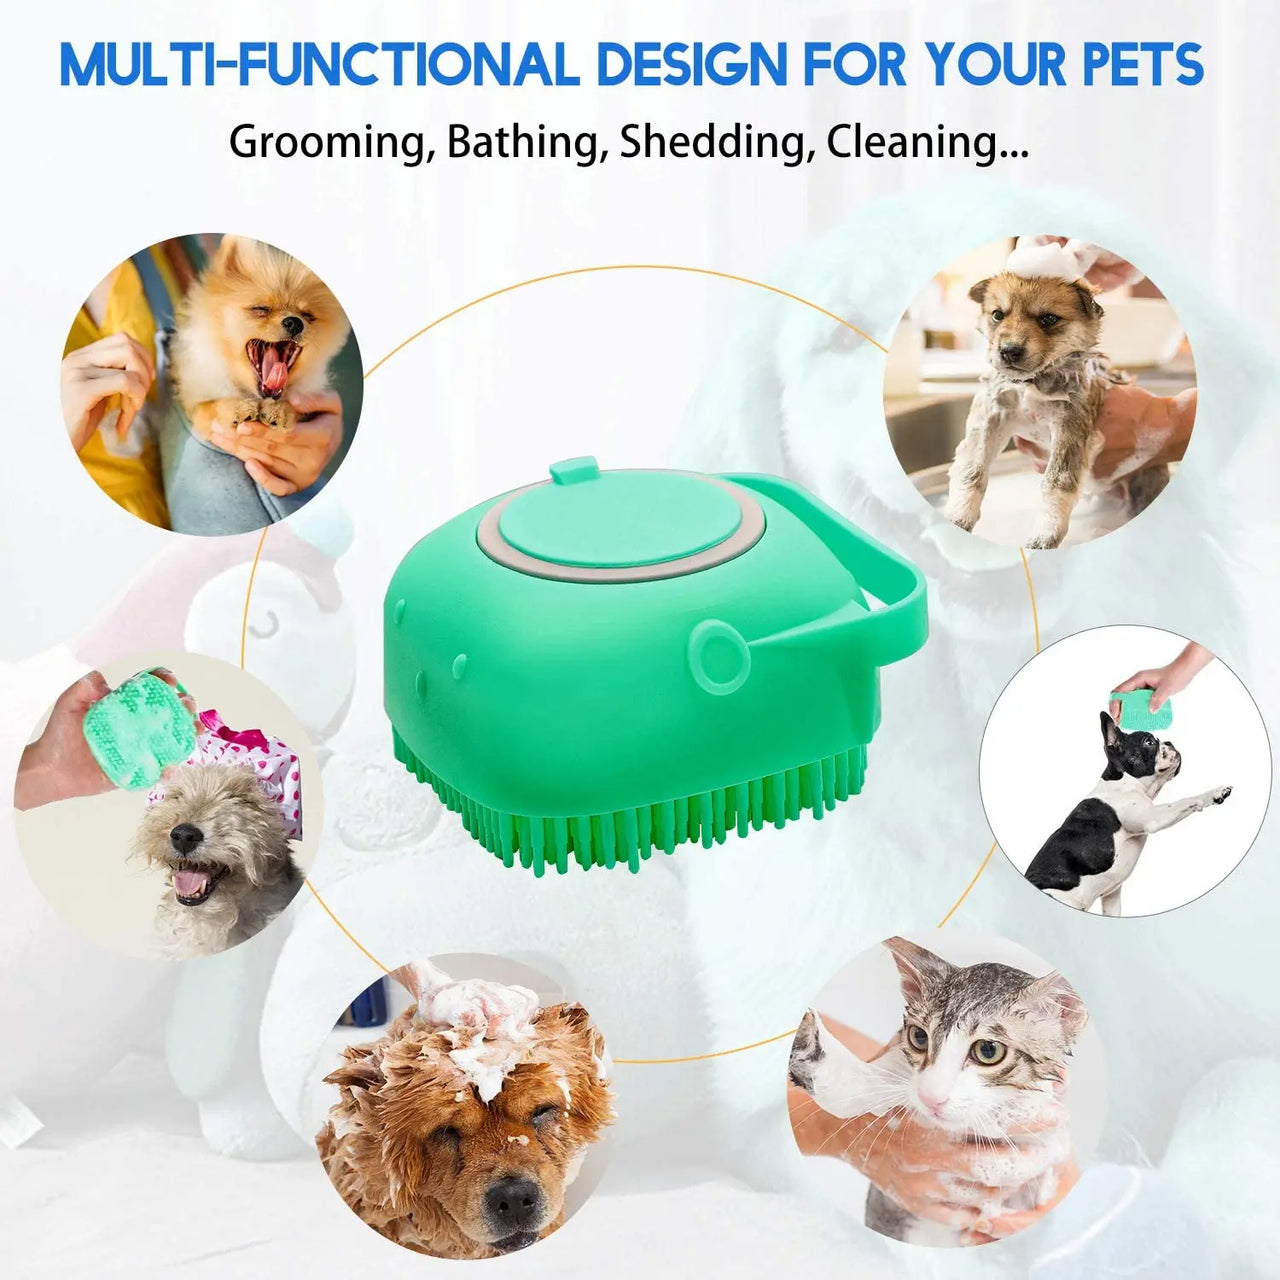 2PCS Pet Shampoo Brush Grooming Scrubber Comb with Massage for Dogs and Cats - Soft Silicone Rubber Bristles For Bathing and Brushing Short Hair,, Gift For Pet 85